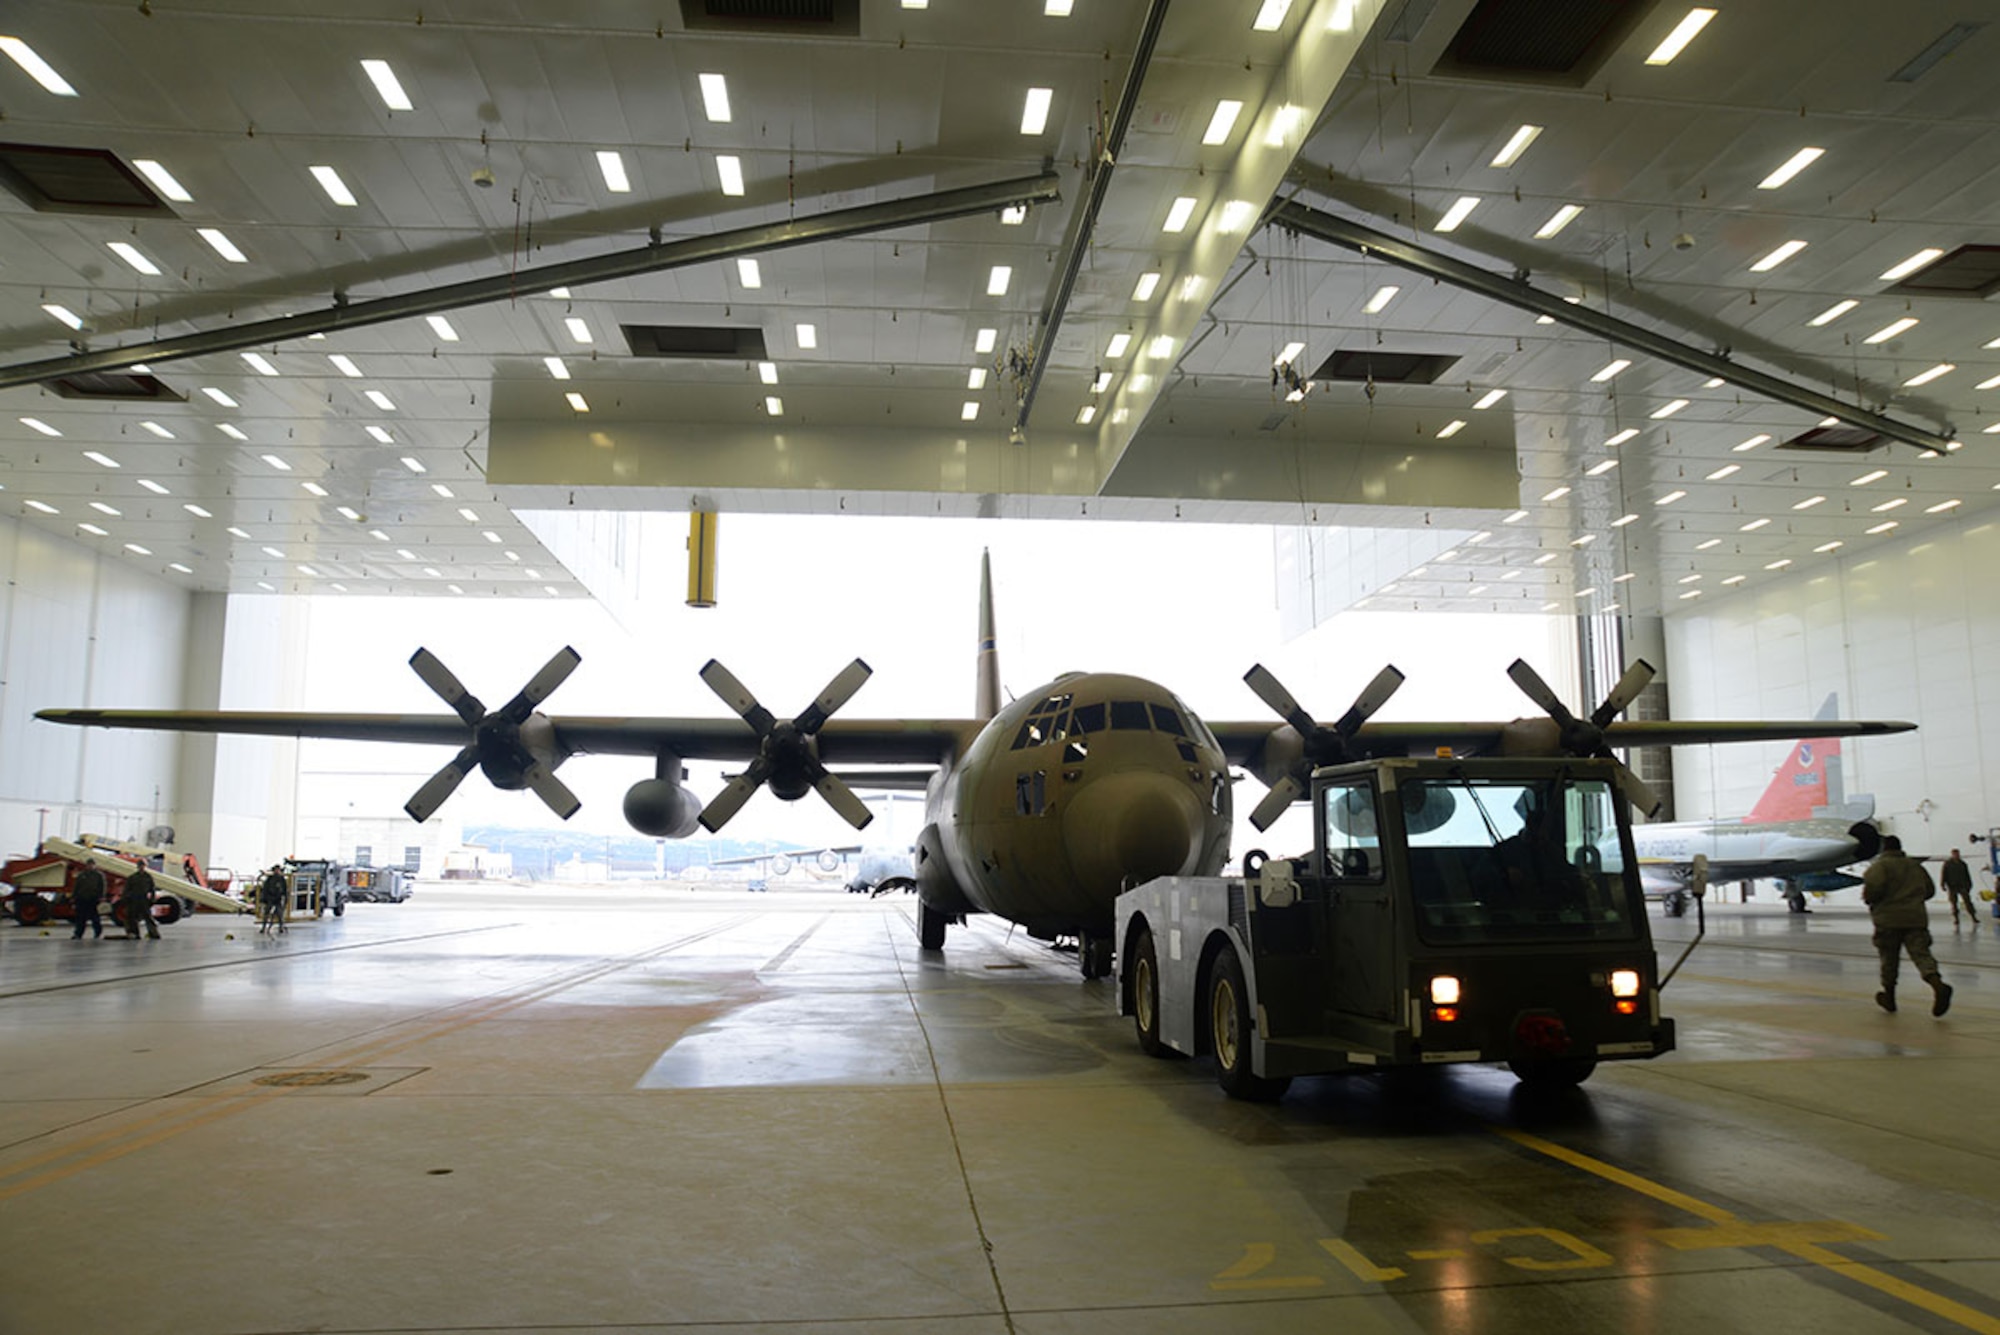 Airmen and contracted personnel work together to tow the static C-130 Hercules into Hangar 21 at Joint Base Elmendorf-Richardson Feb. 27, 2016. The aircraft has been towed to Hangar 21 for refurbishment and is scheduled to return to Heritage Park in April. (U.S. Air Force photo by Airman 1st Class Christopher R. Morales)